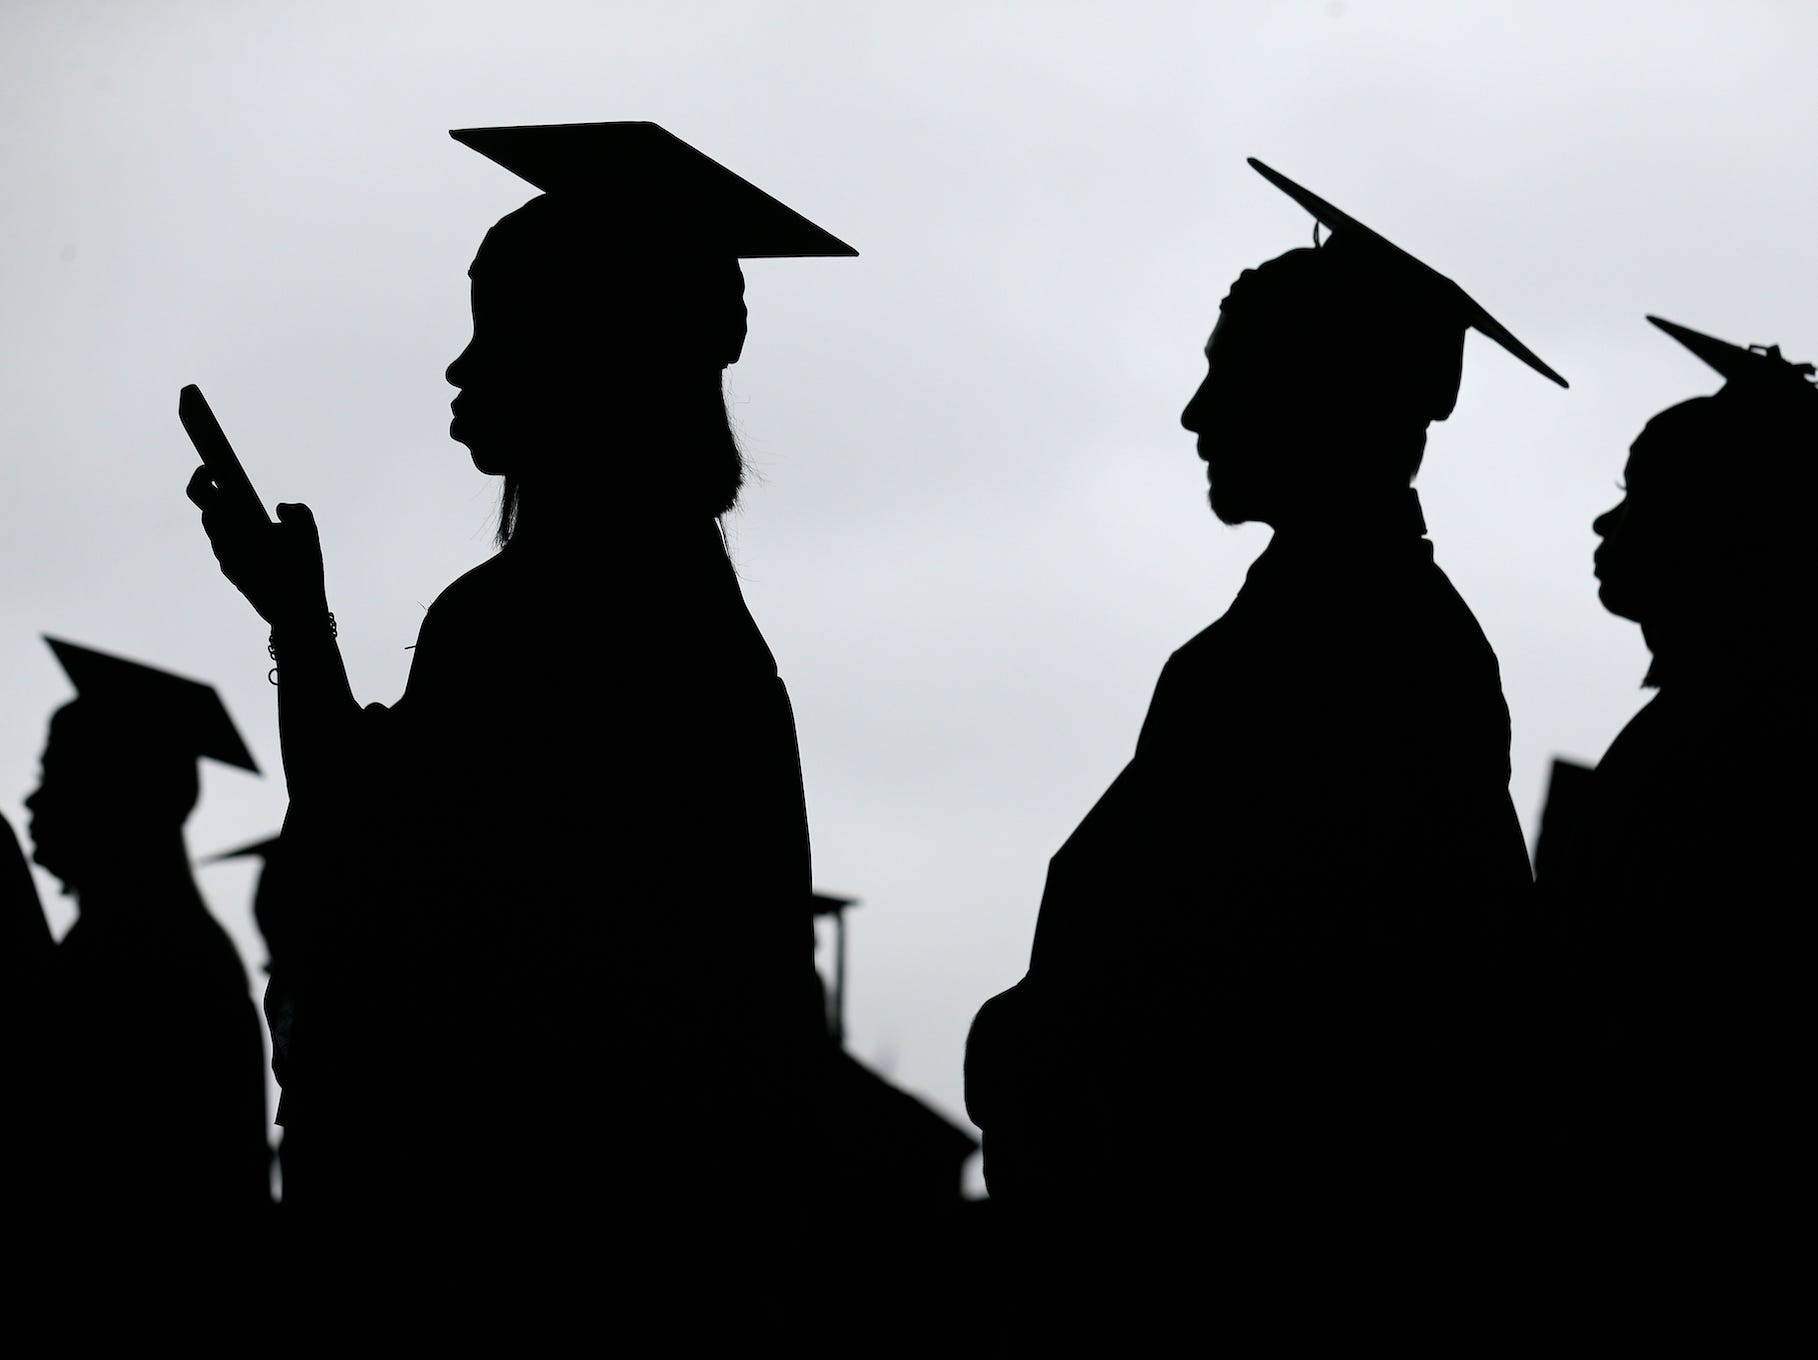 In this May 17, 2018, file photo, new graduates line up before the start of the Bergen Community College commencement at MetLife Stadium in East Rutherford, N.J. There’s no single policy or action that will alleviate America’s $1.74 trillion student loan debt crisis while simultaneously preventing students from taking on unaffordable amounts of future debt. Higher education financing experts are divided on the exact combination of solutions, but all agree it will require a multipronged approach.